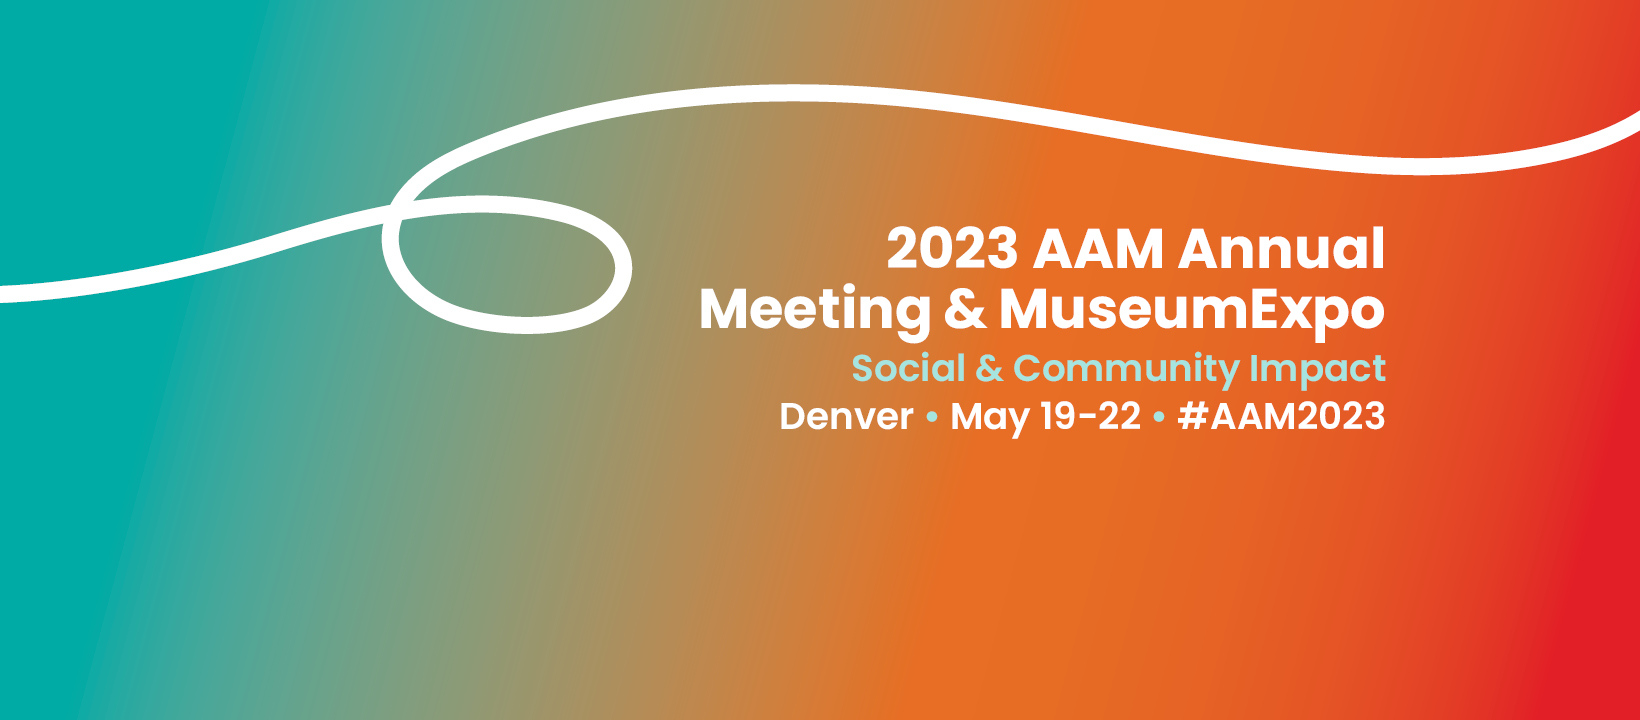 2024 Annual Meeting & MuseumExpo Open Call for Proposals